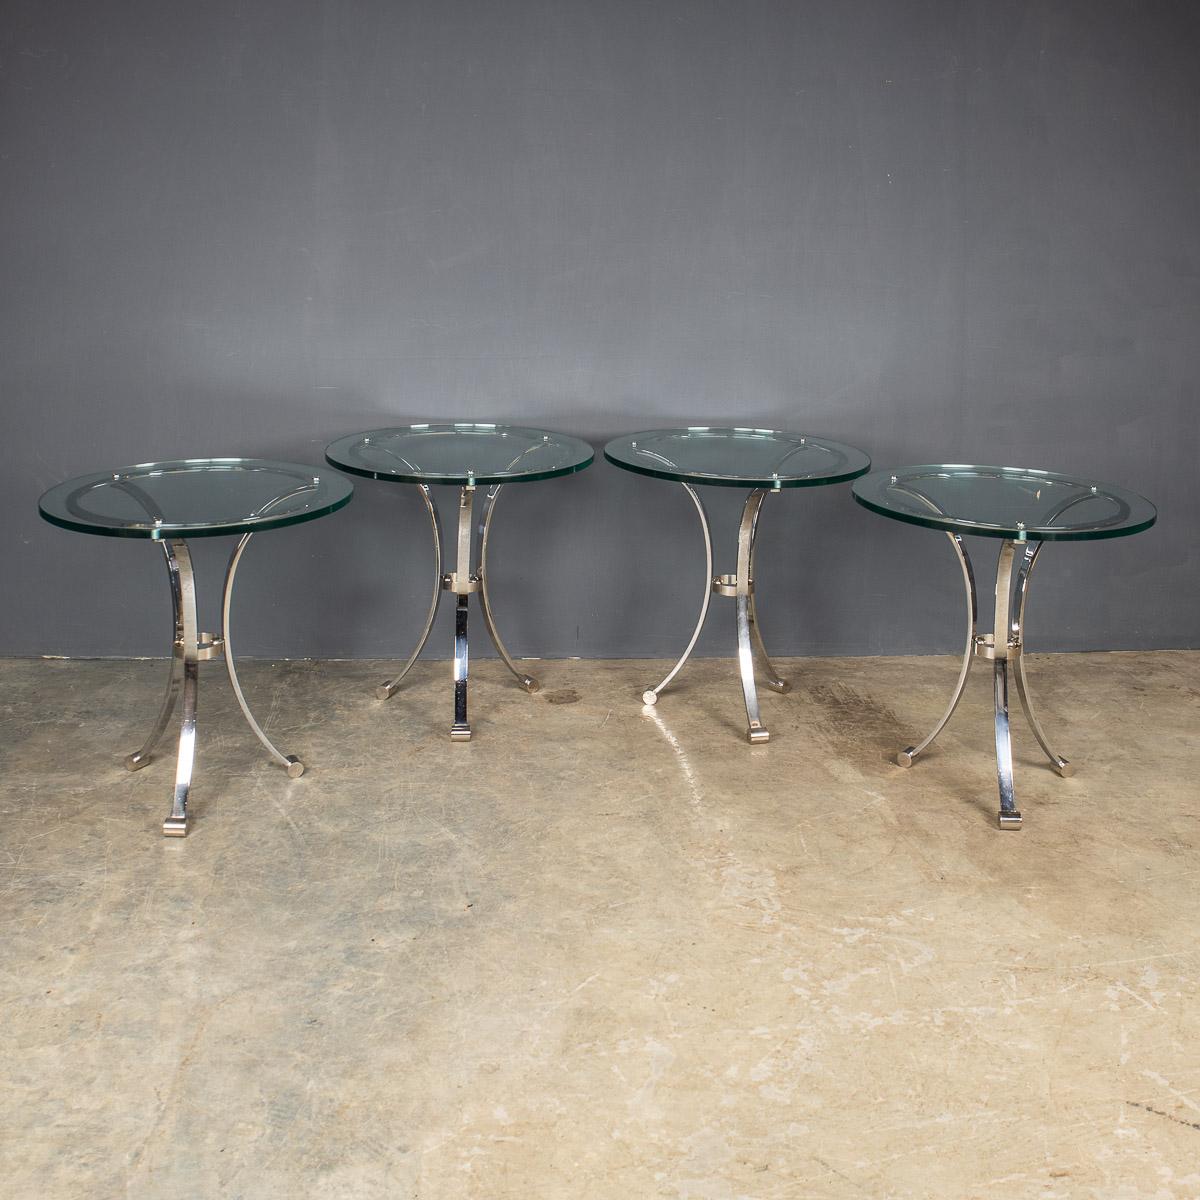 Stylish mid-20th Century set of four sleek bar tables with polished metal legs and heavy glass tops. These elegant side tables once adorned the bar of the Waldorf Hotel in New York, circa 1940’s.

Condition
In good condition - wear consistent